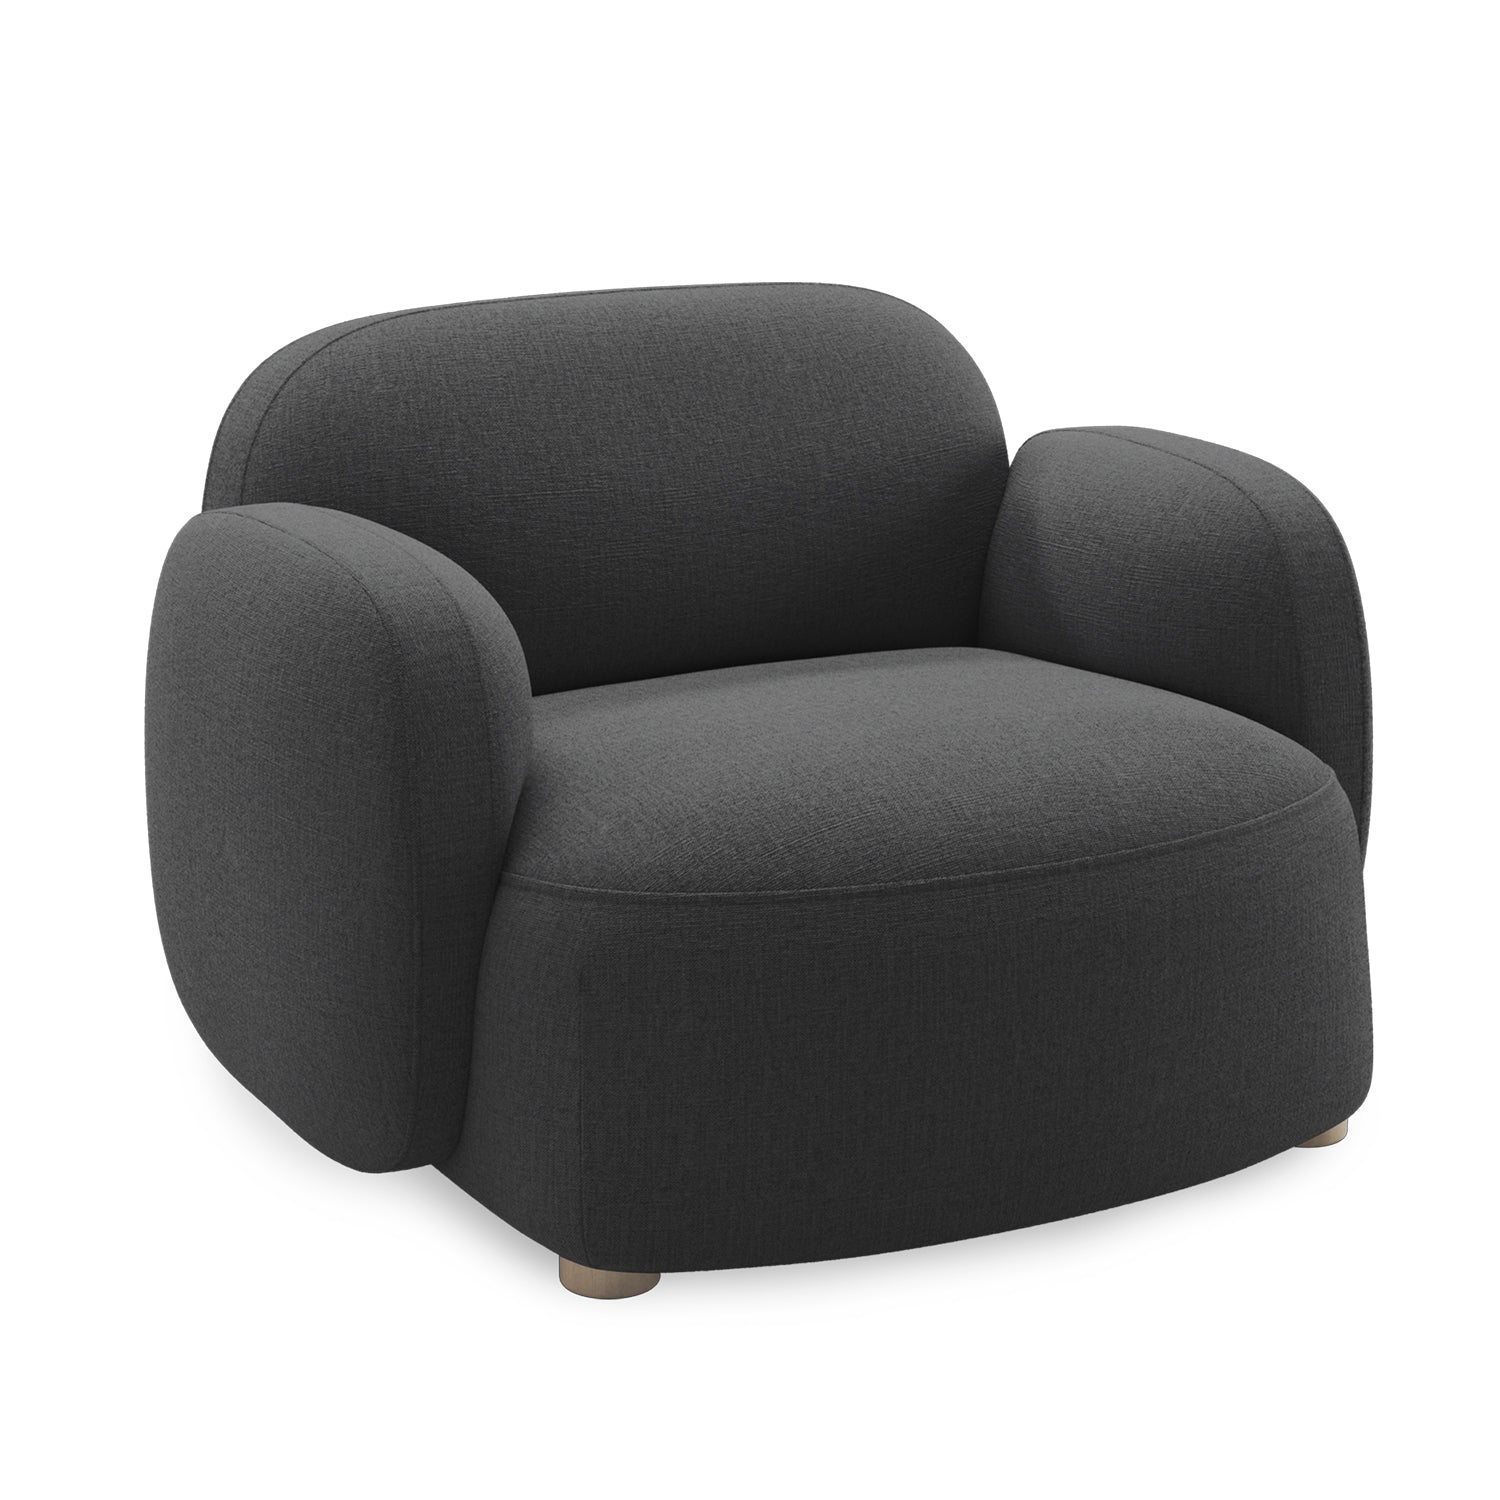 Northern Gem Lounge Chair with Armrest in  Brusvik 08